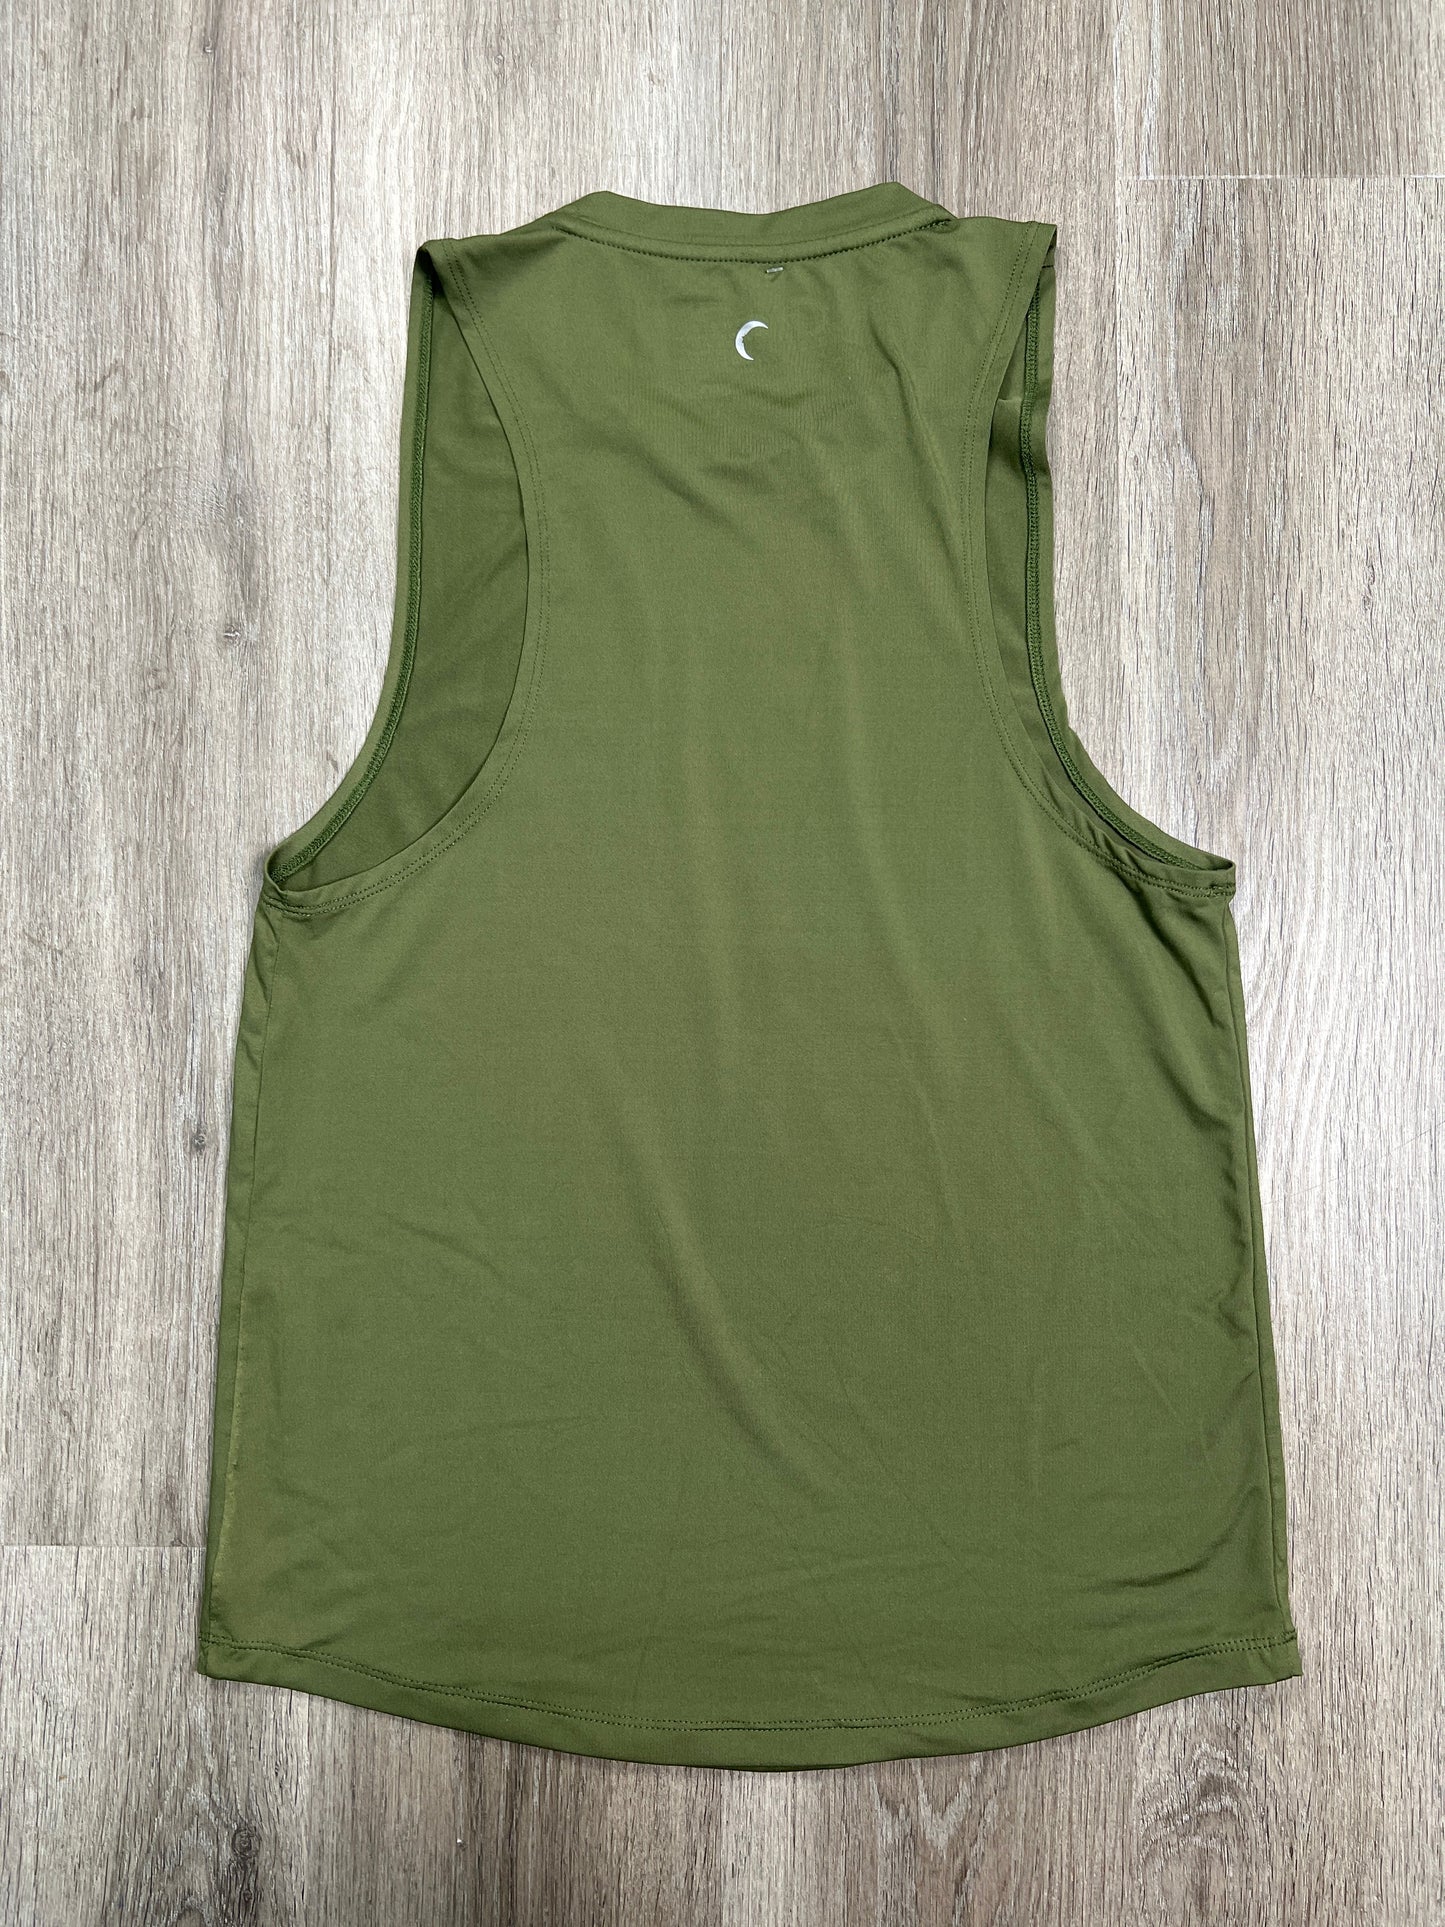 Green Athletic Tank Top Zyia, Size L